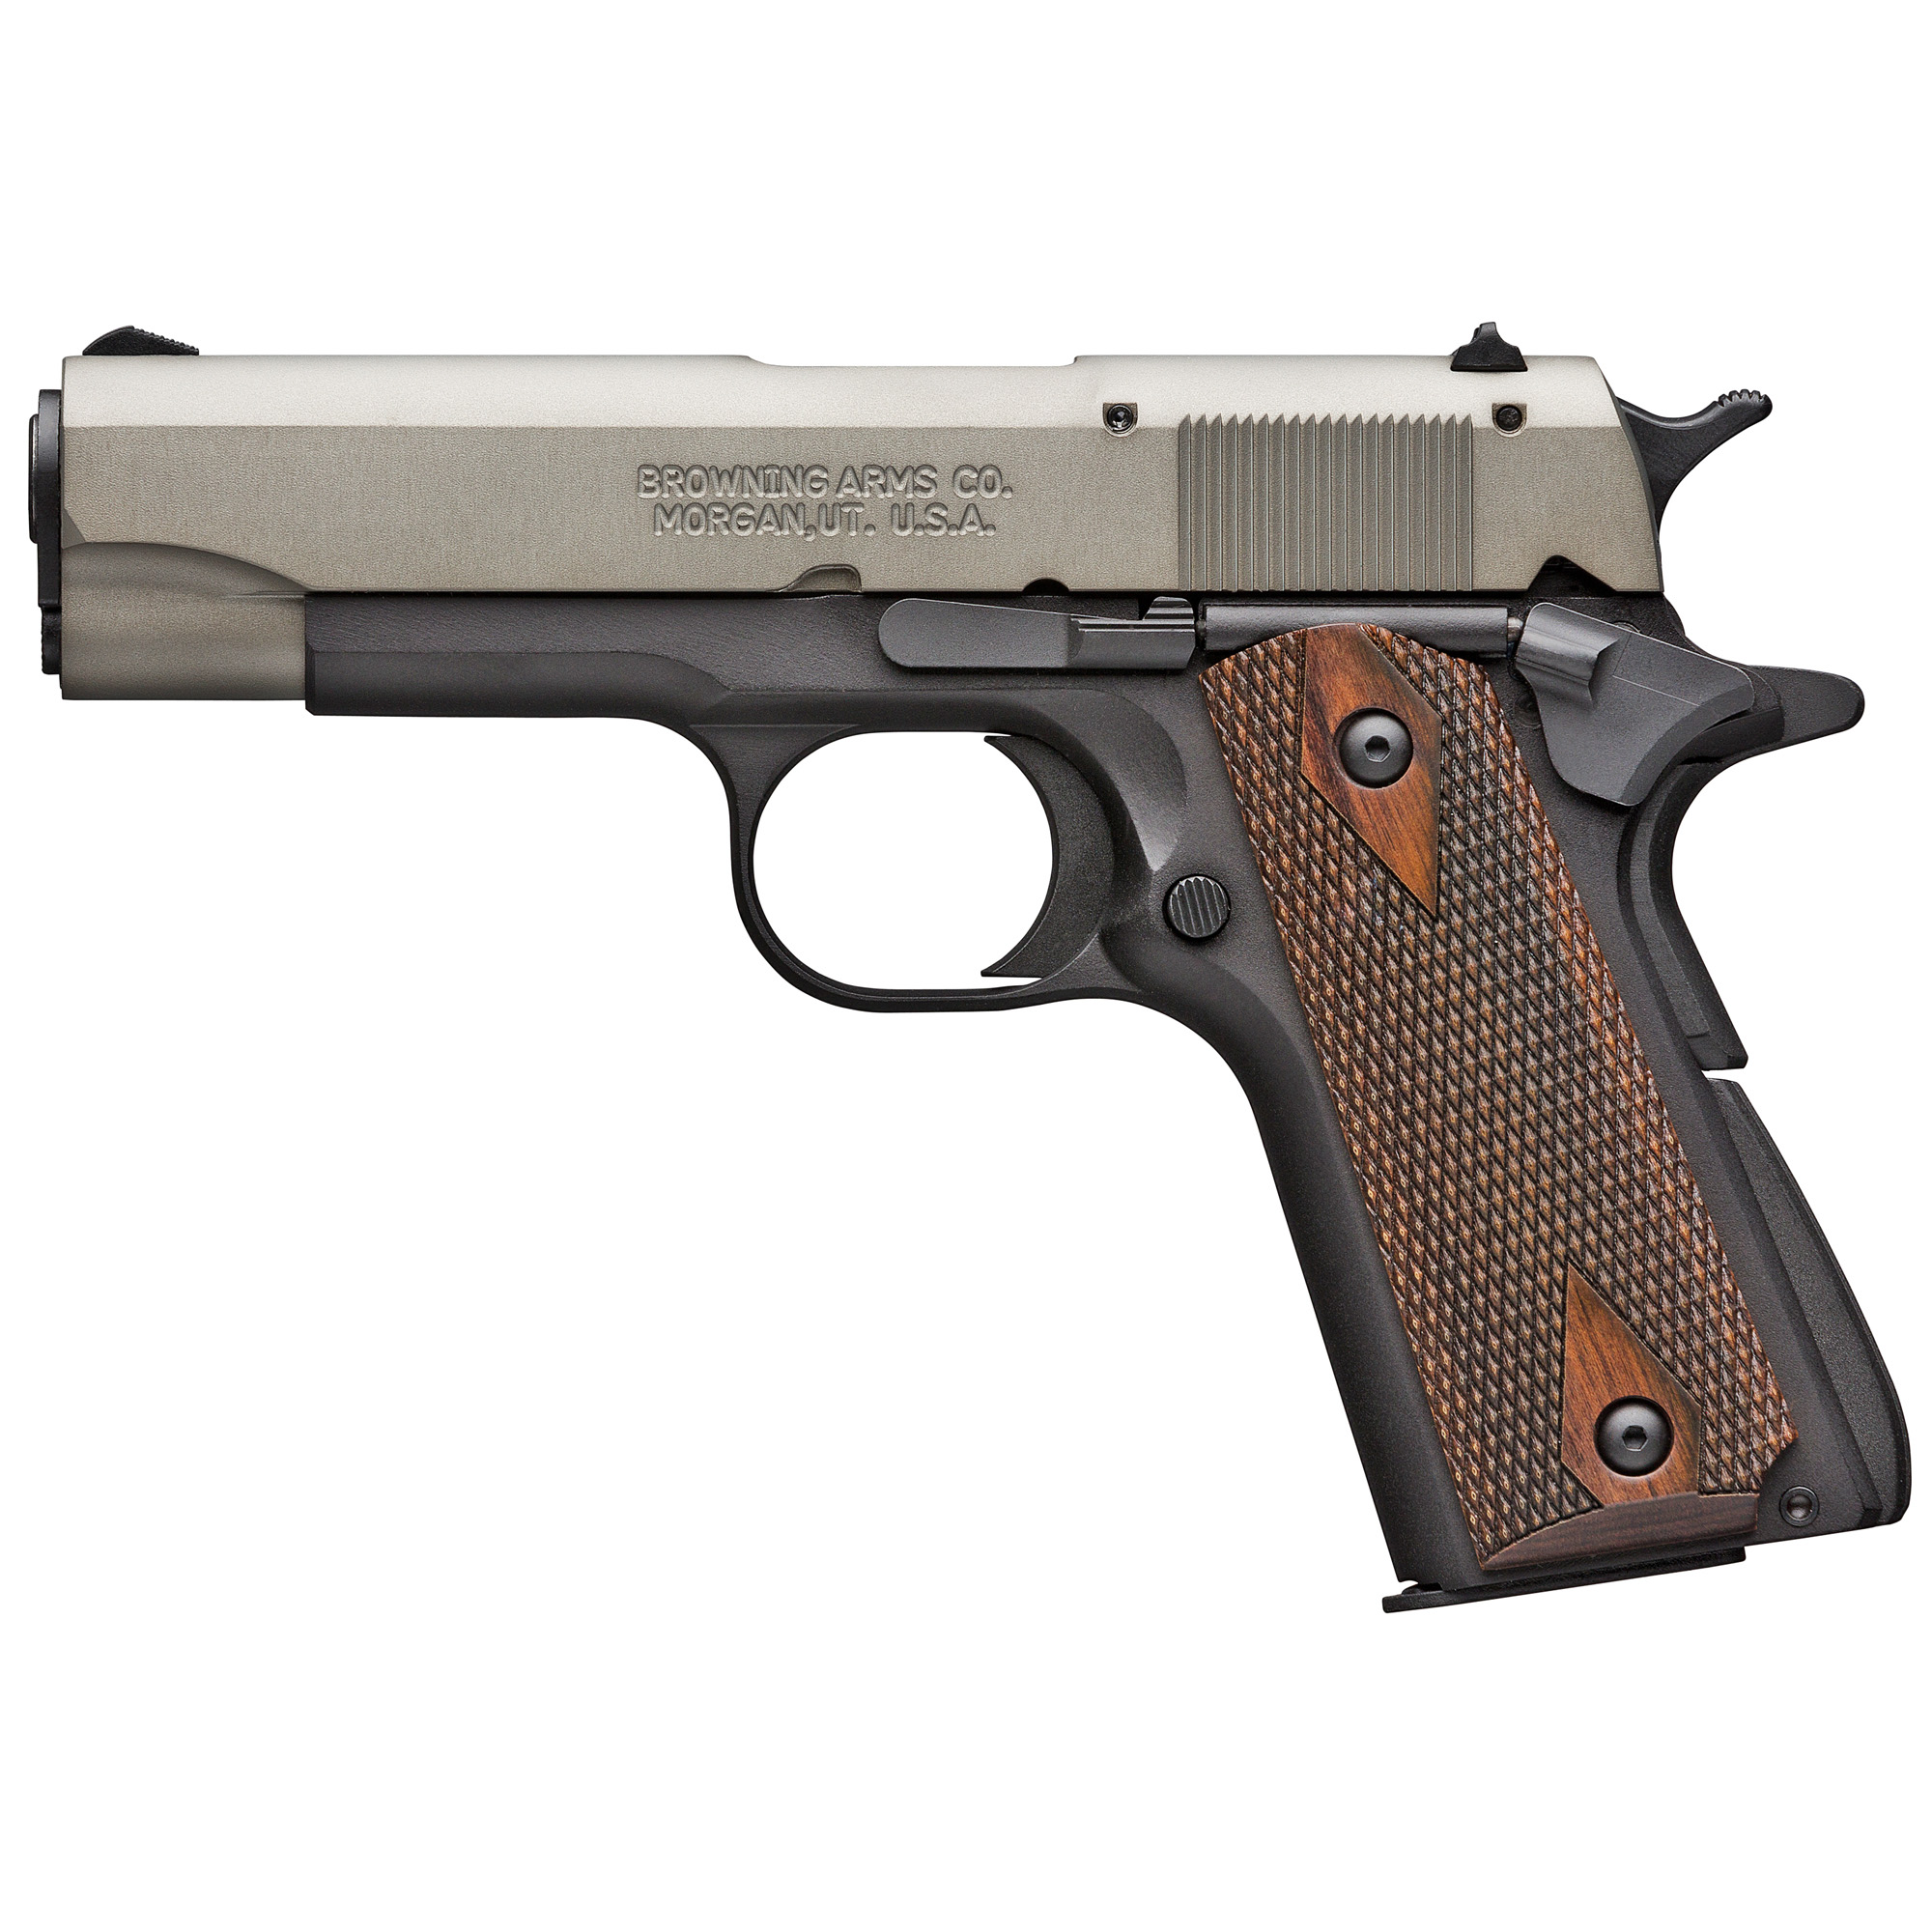 BROWNING 1911-22A1 CMP 22LR 3.63 10RD GRY